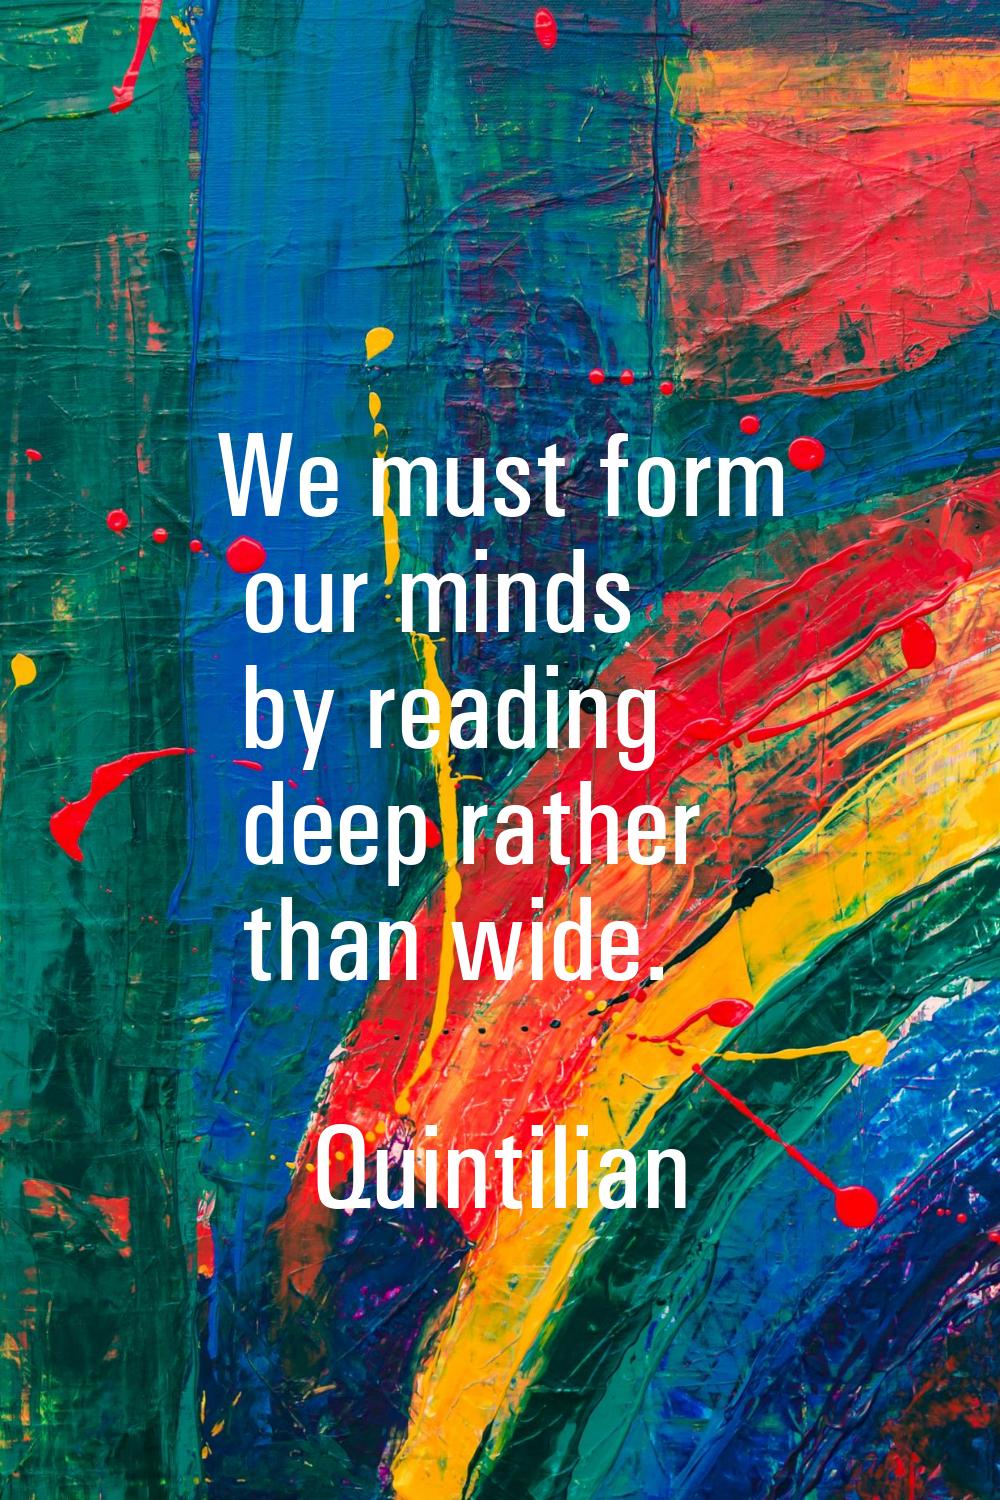 We must form our minds by reading deep rather than wide.